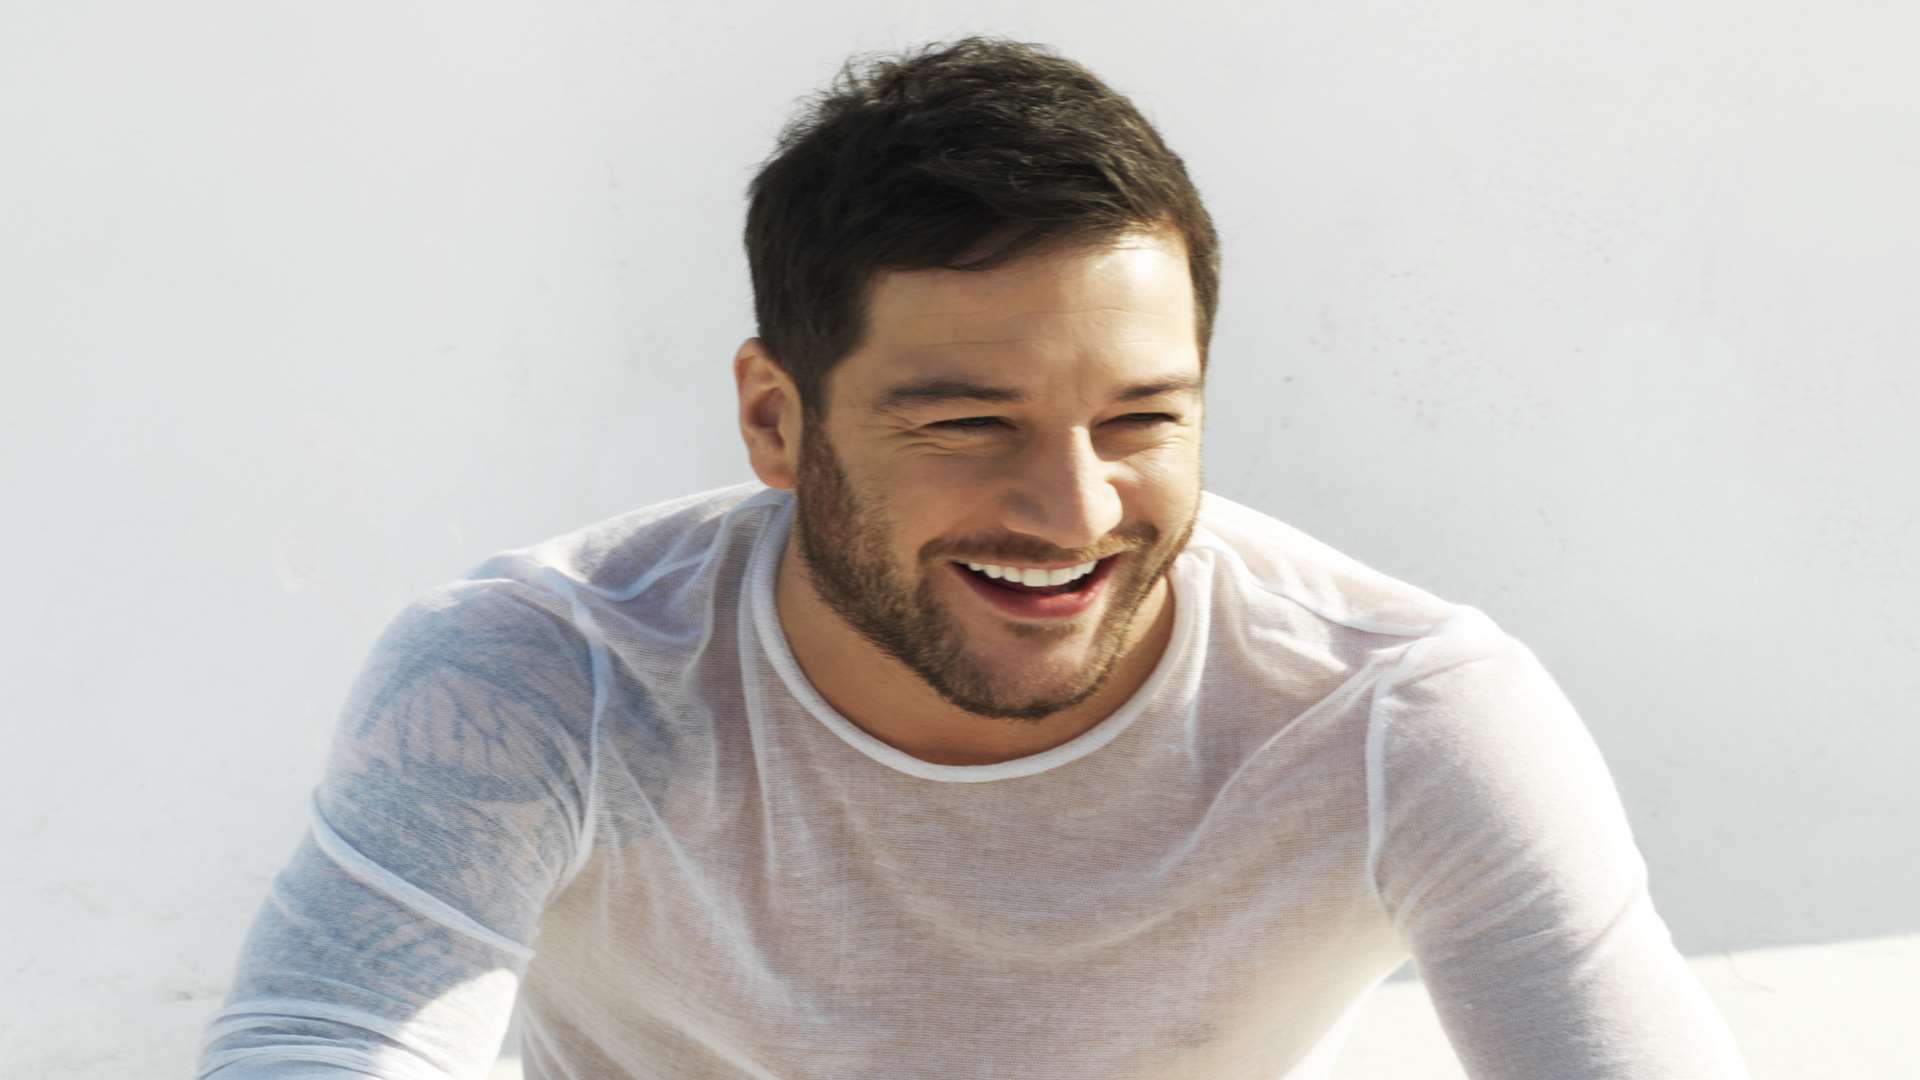 Matt Cardle is coming to the Marlowe Theatre in July